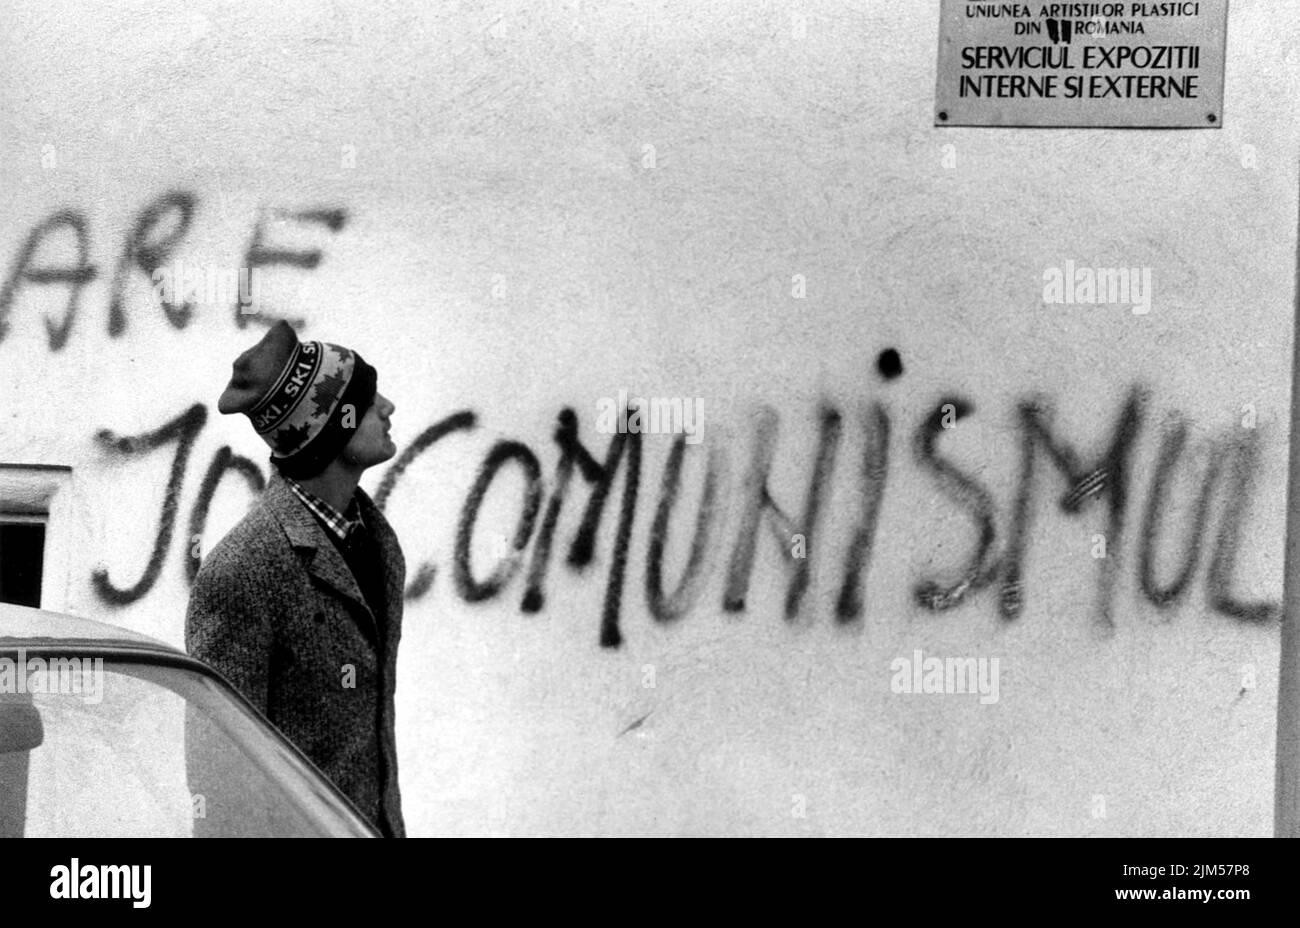 Bucharest, Romania, January 1990. Days after the Romanian anti-communist Revolution of 1989, a man passes by a building where someone spray-painted 'Down with communism', an act unthinkable a month prior. Stock Photo